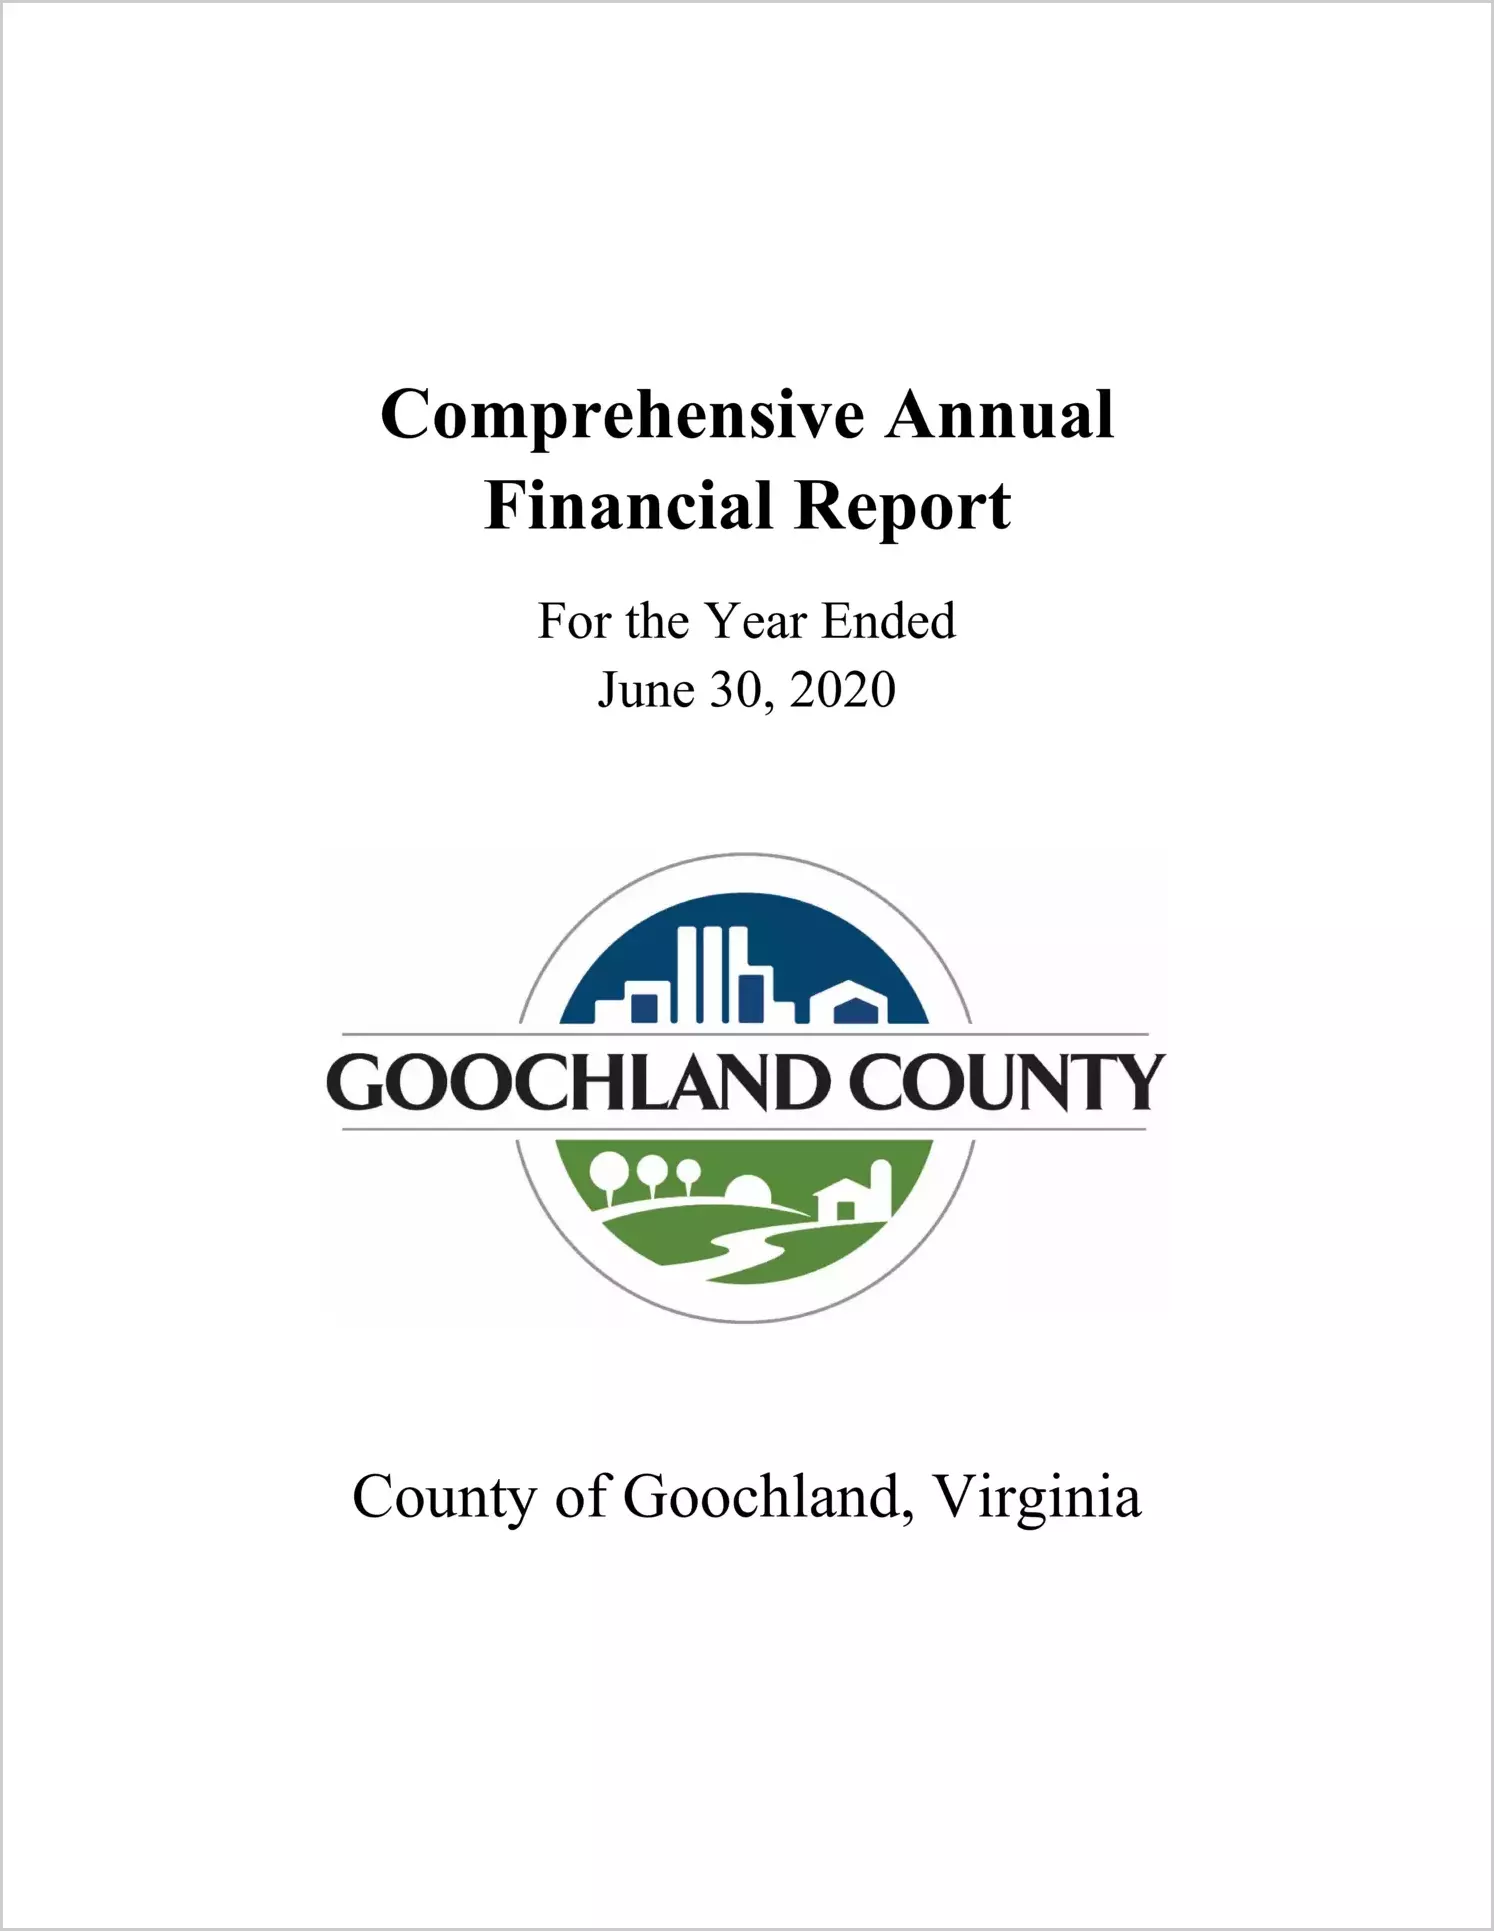 2020 Annual Financial Report for County of Goochland